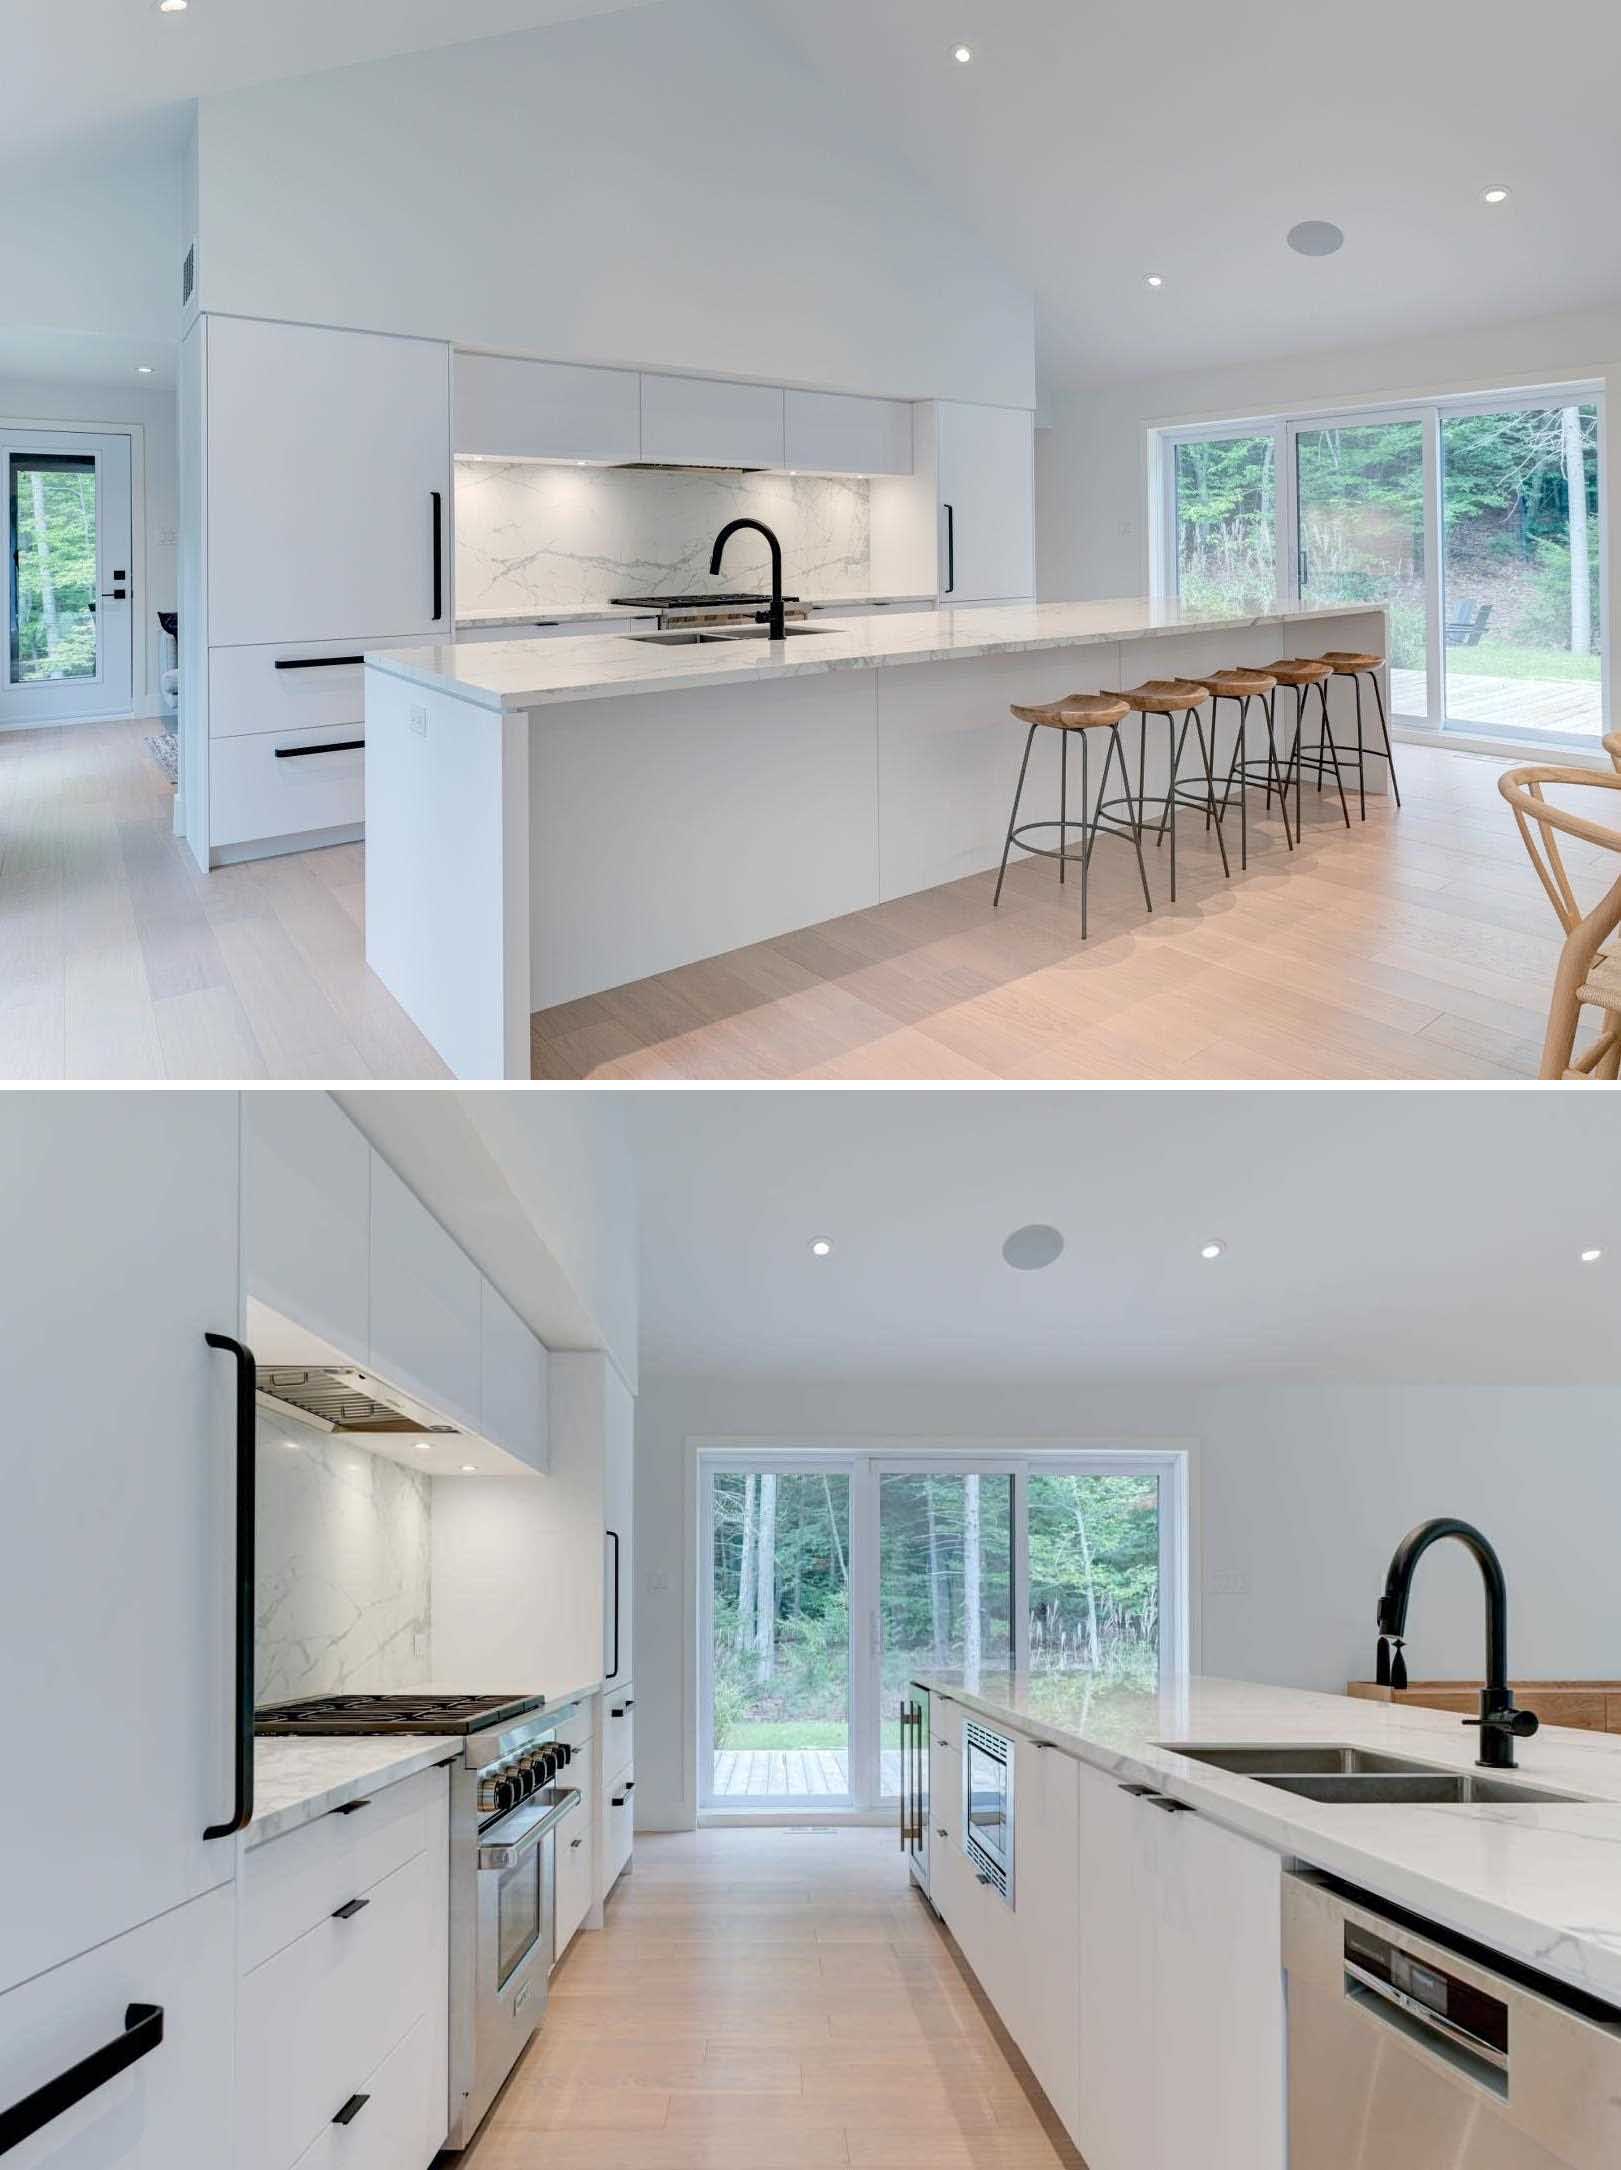 In this modern kitchen, a long island allows for plenty of counterspace, while the light color complements the minimalist white cabinets and integrated appliances. The black hardware and stool legs are contrasting elements.